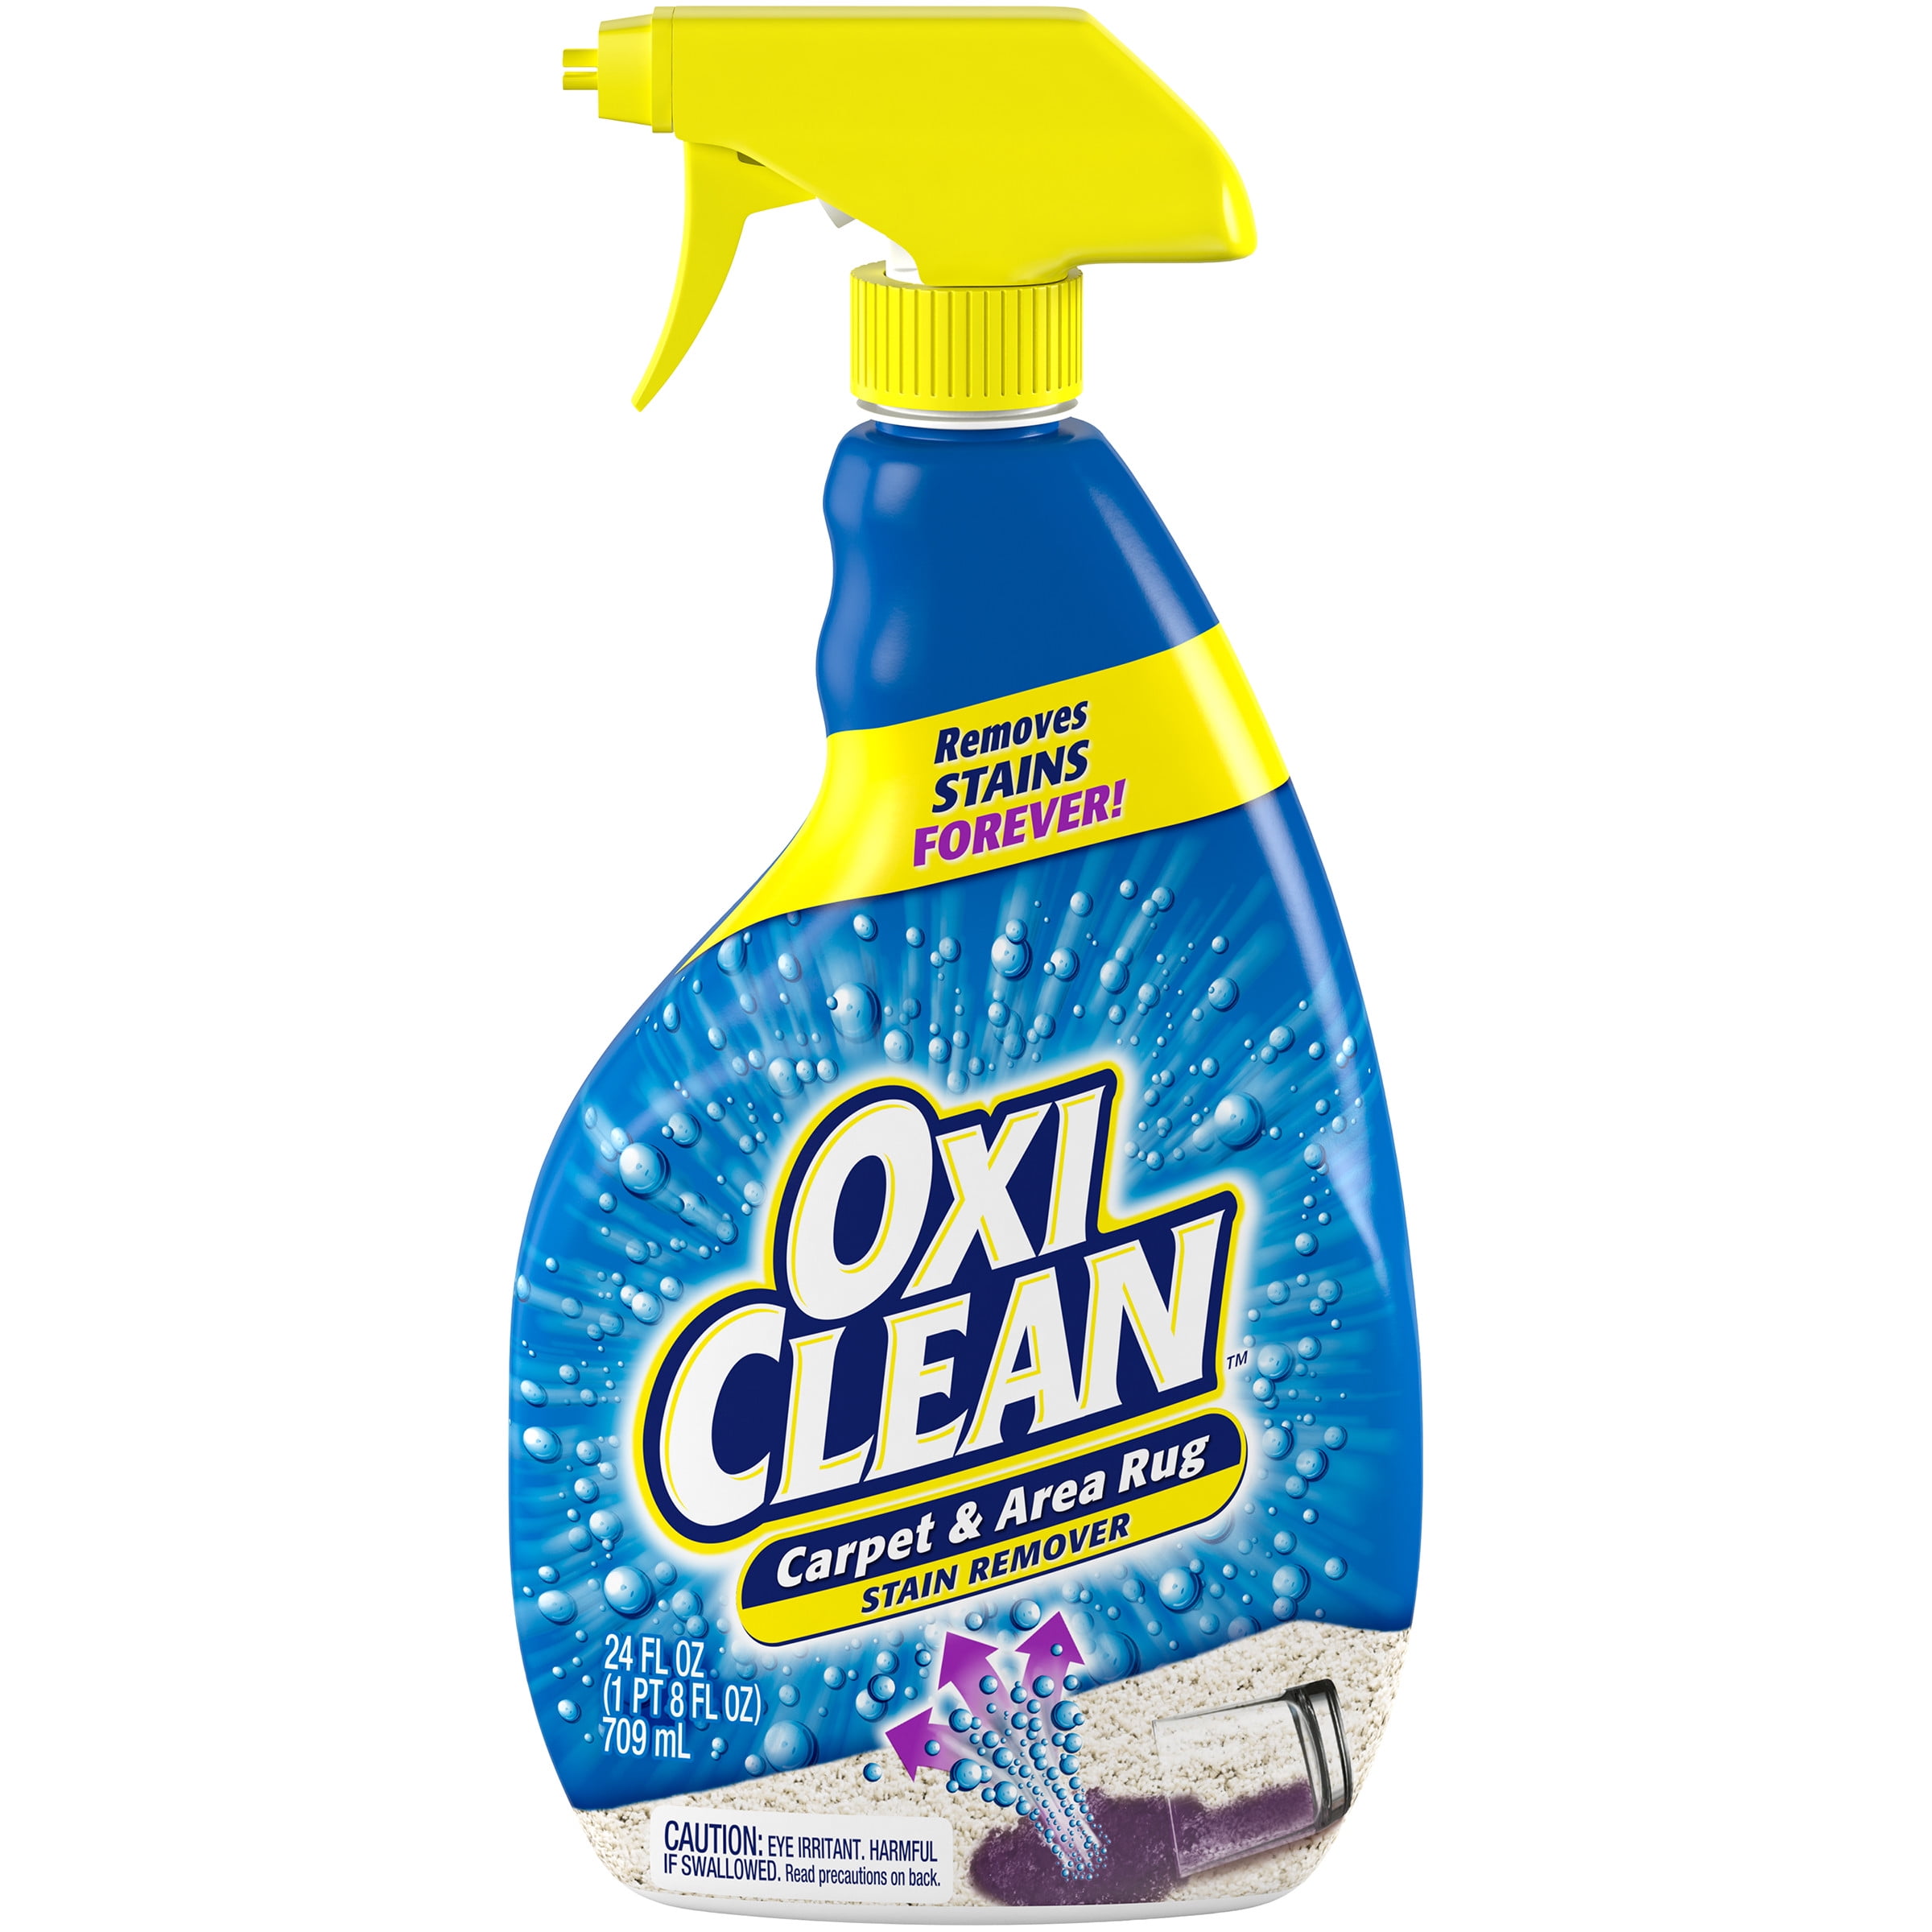 OxiClean Carpet & Area Rug Stain Remover Spray